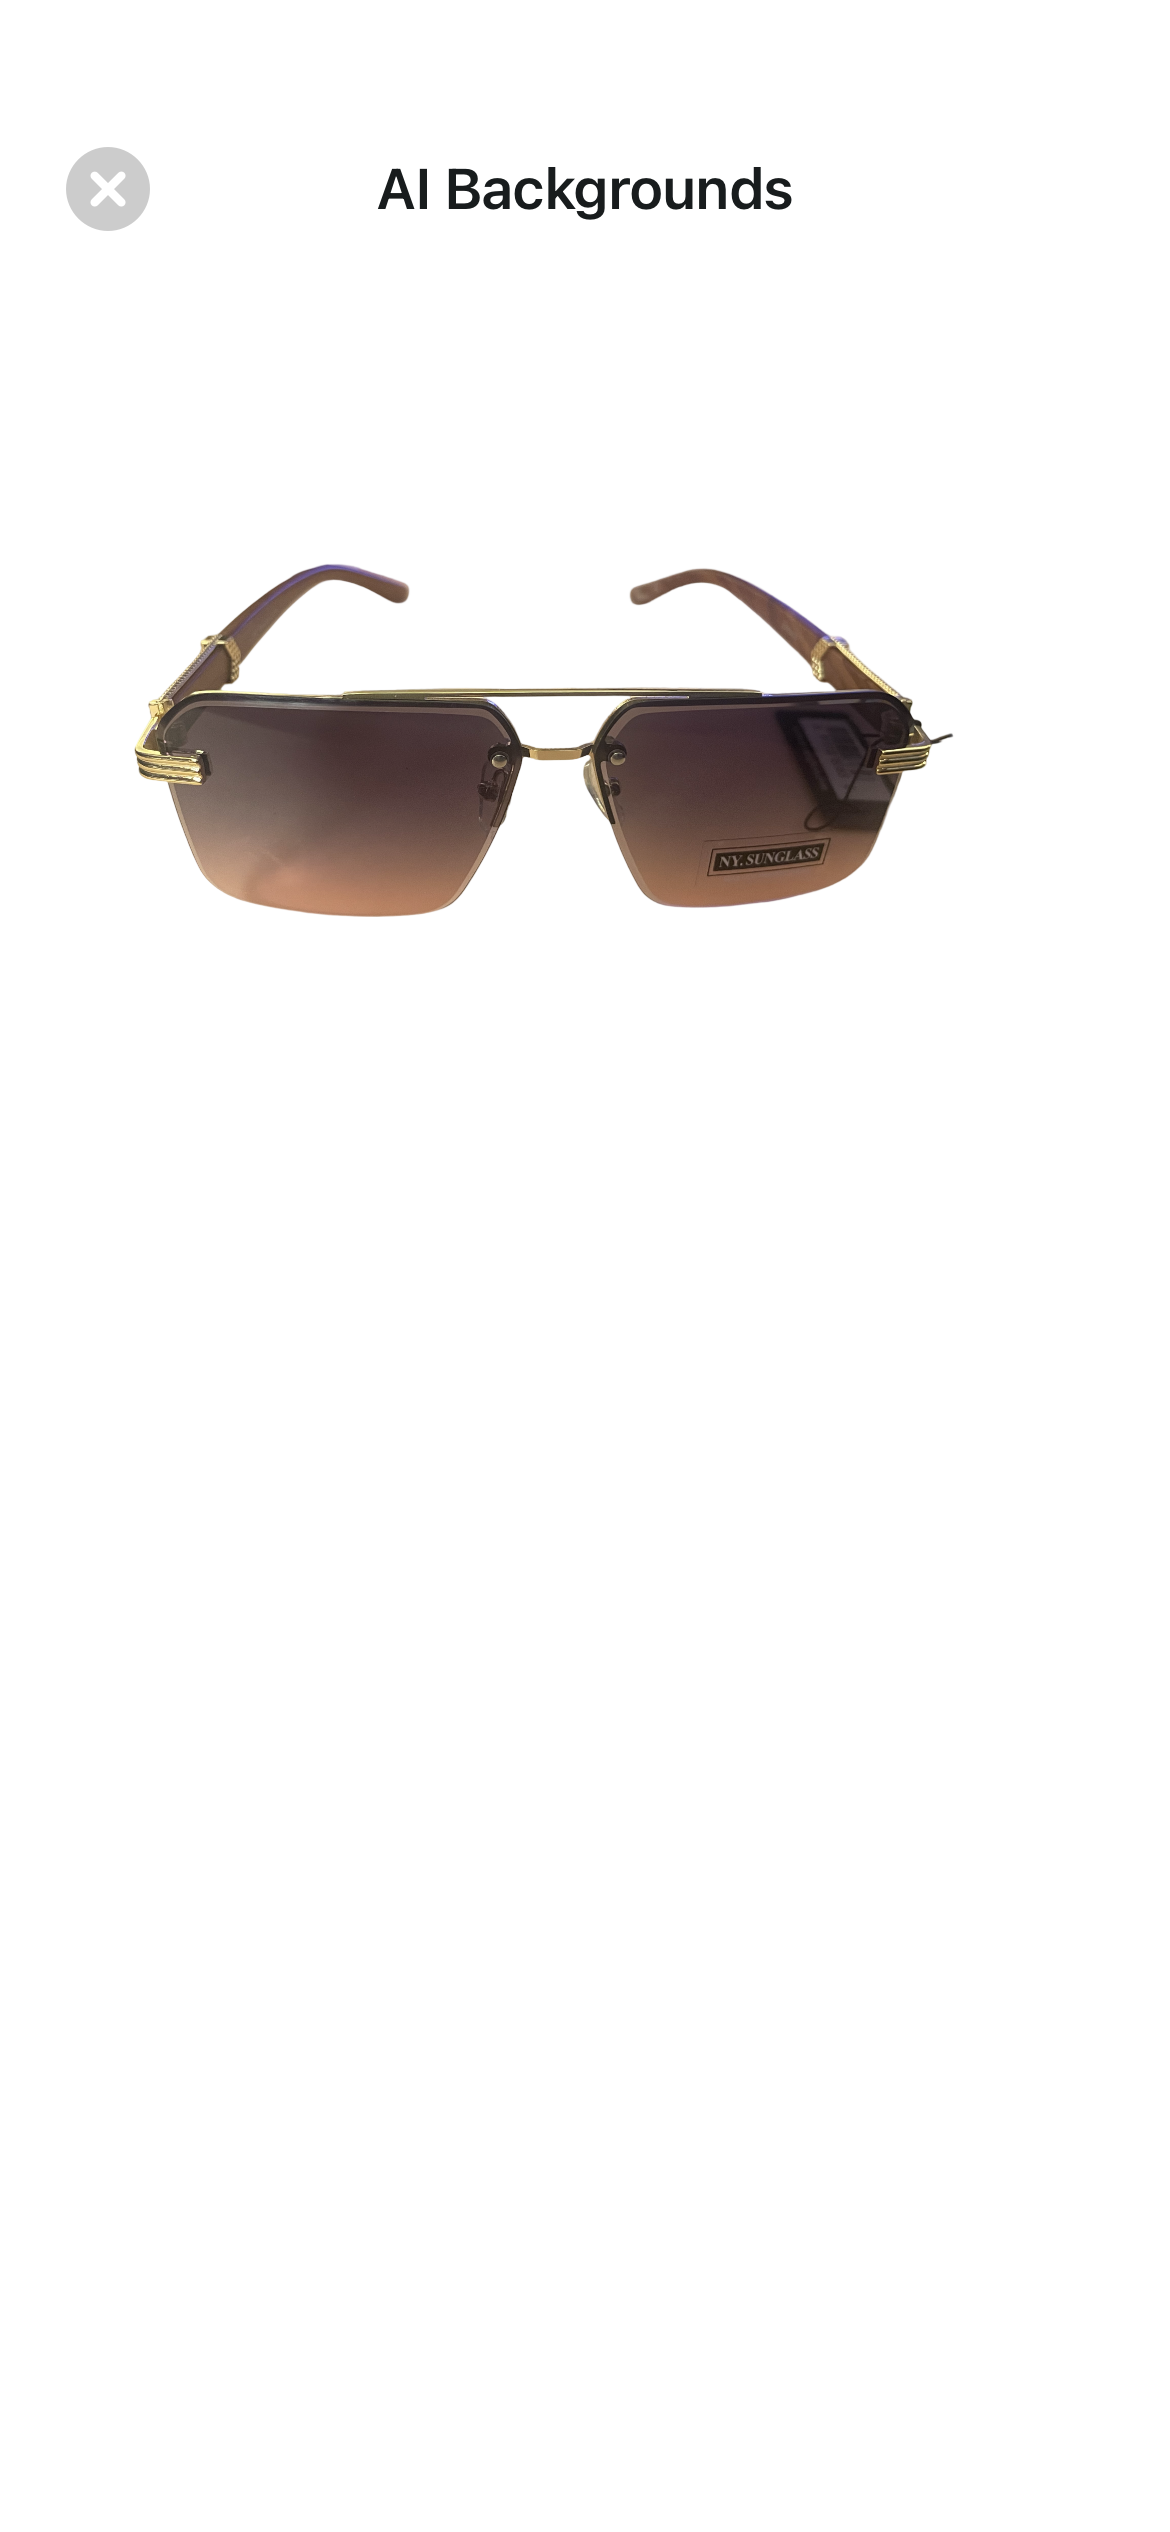 Classy & Elegant Sophisticated Hip Hop Sunglasses Silver & Faux Wood Frame for men or women - Available in 3 Colors